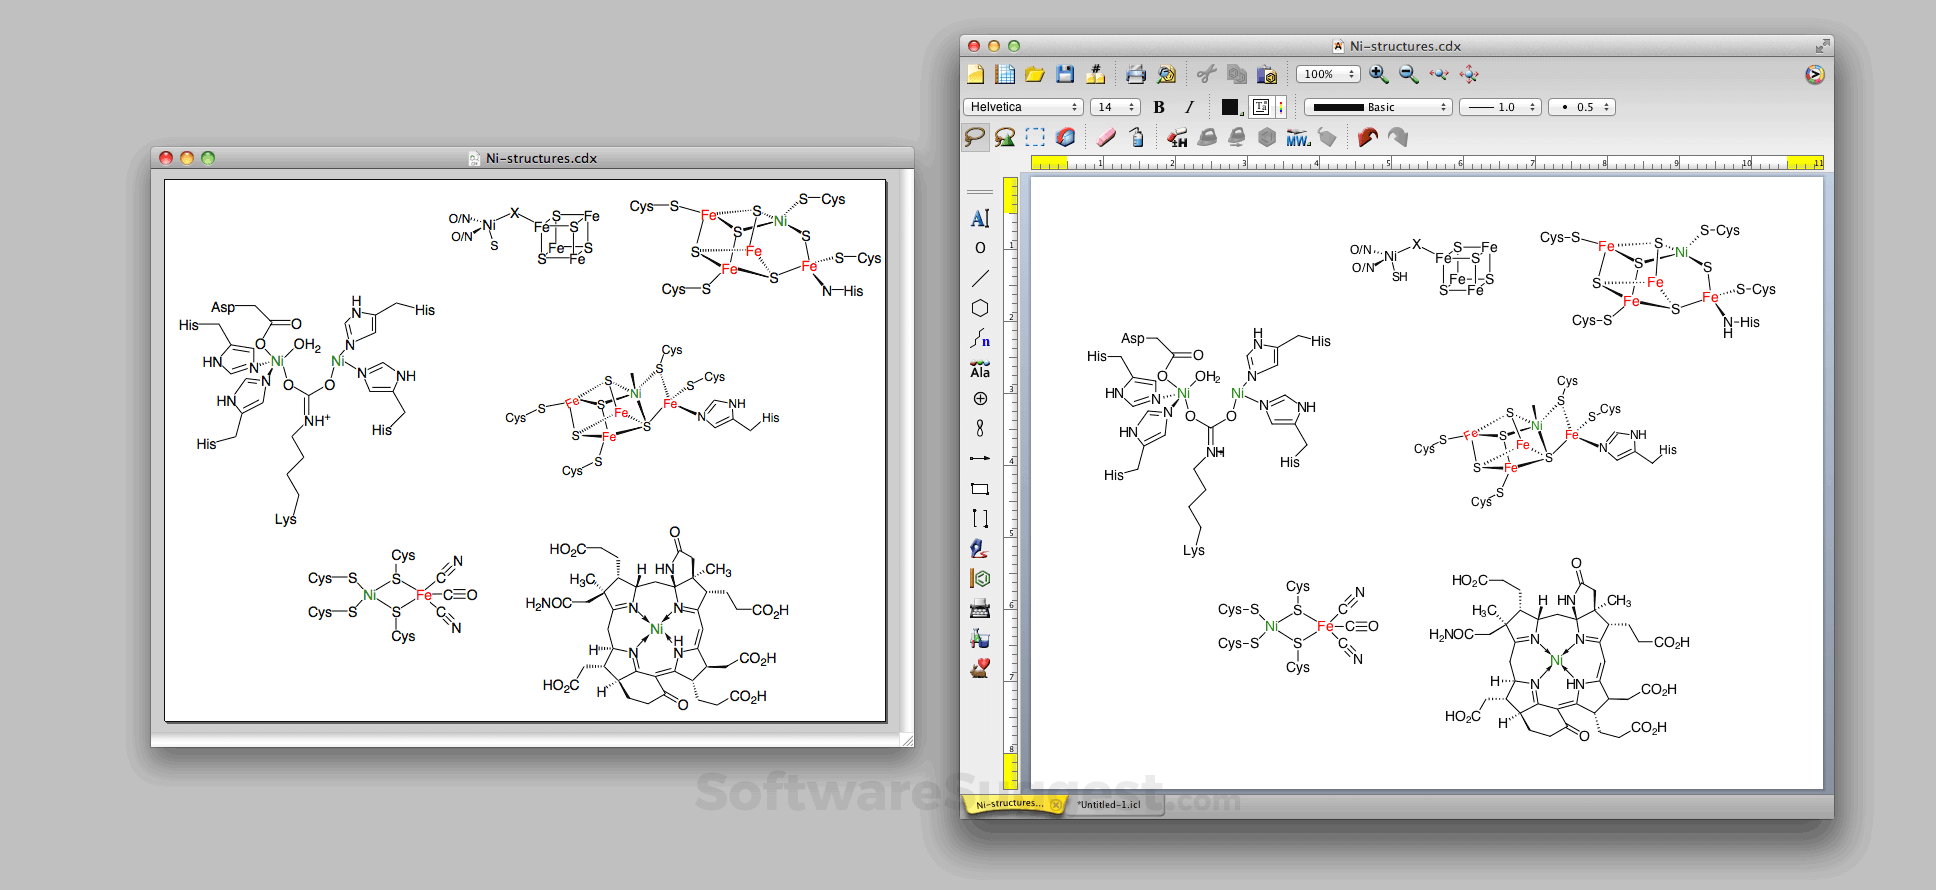 chemdoodle help formal charge